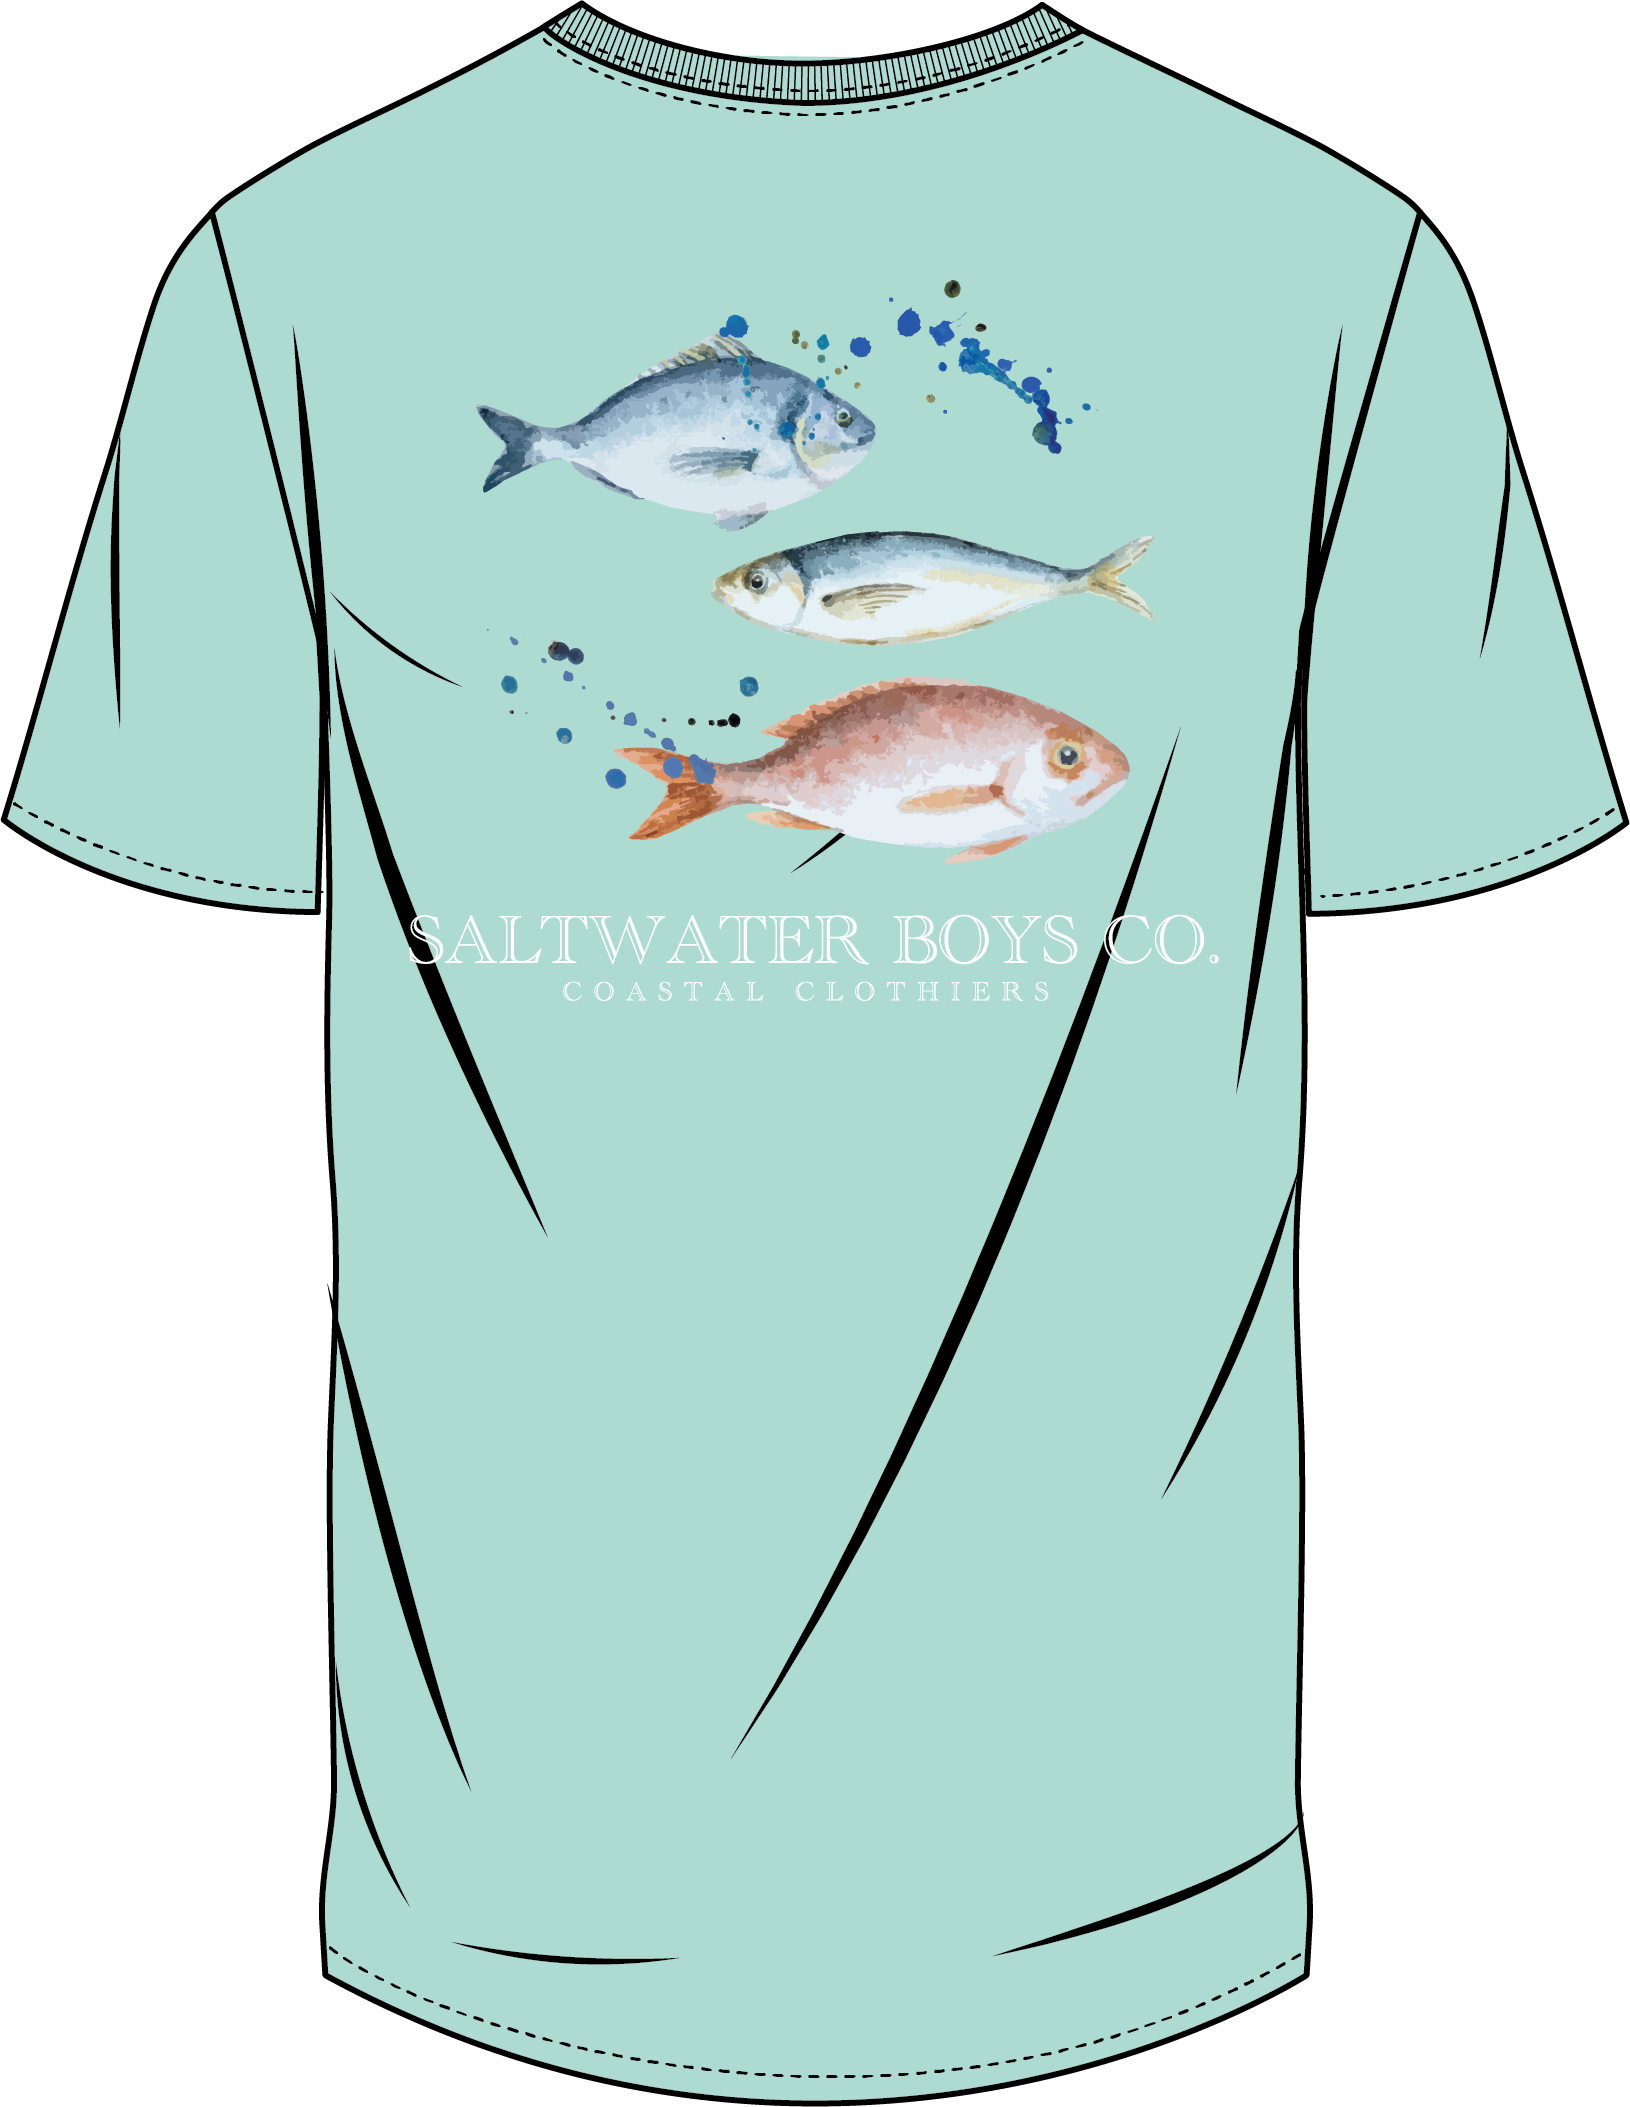 Saltwater Boys Co.  Coastal Inspired Clothing for Boys